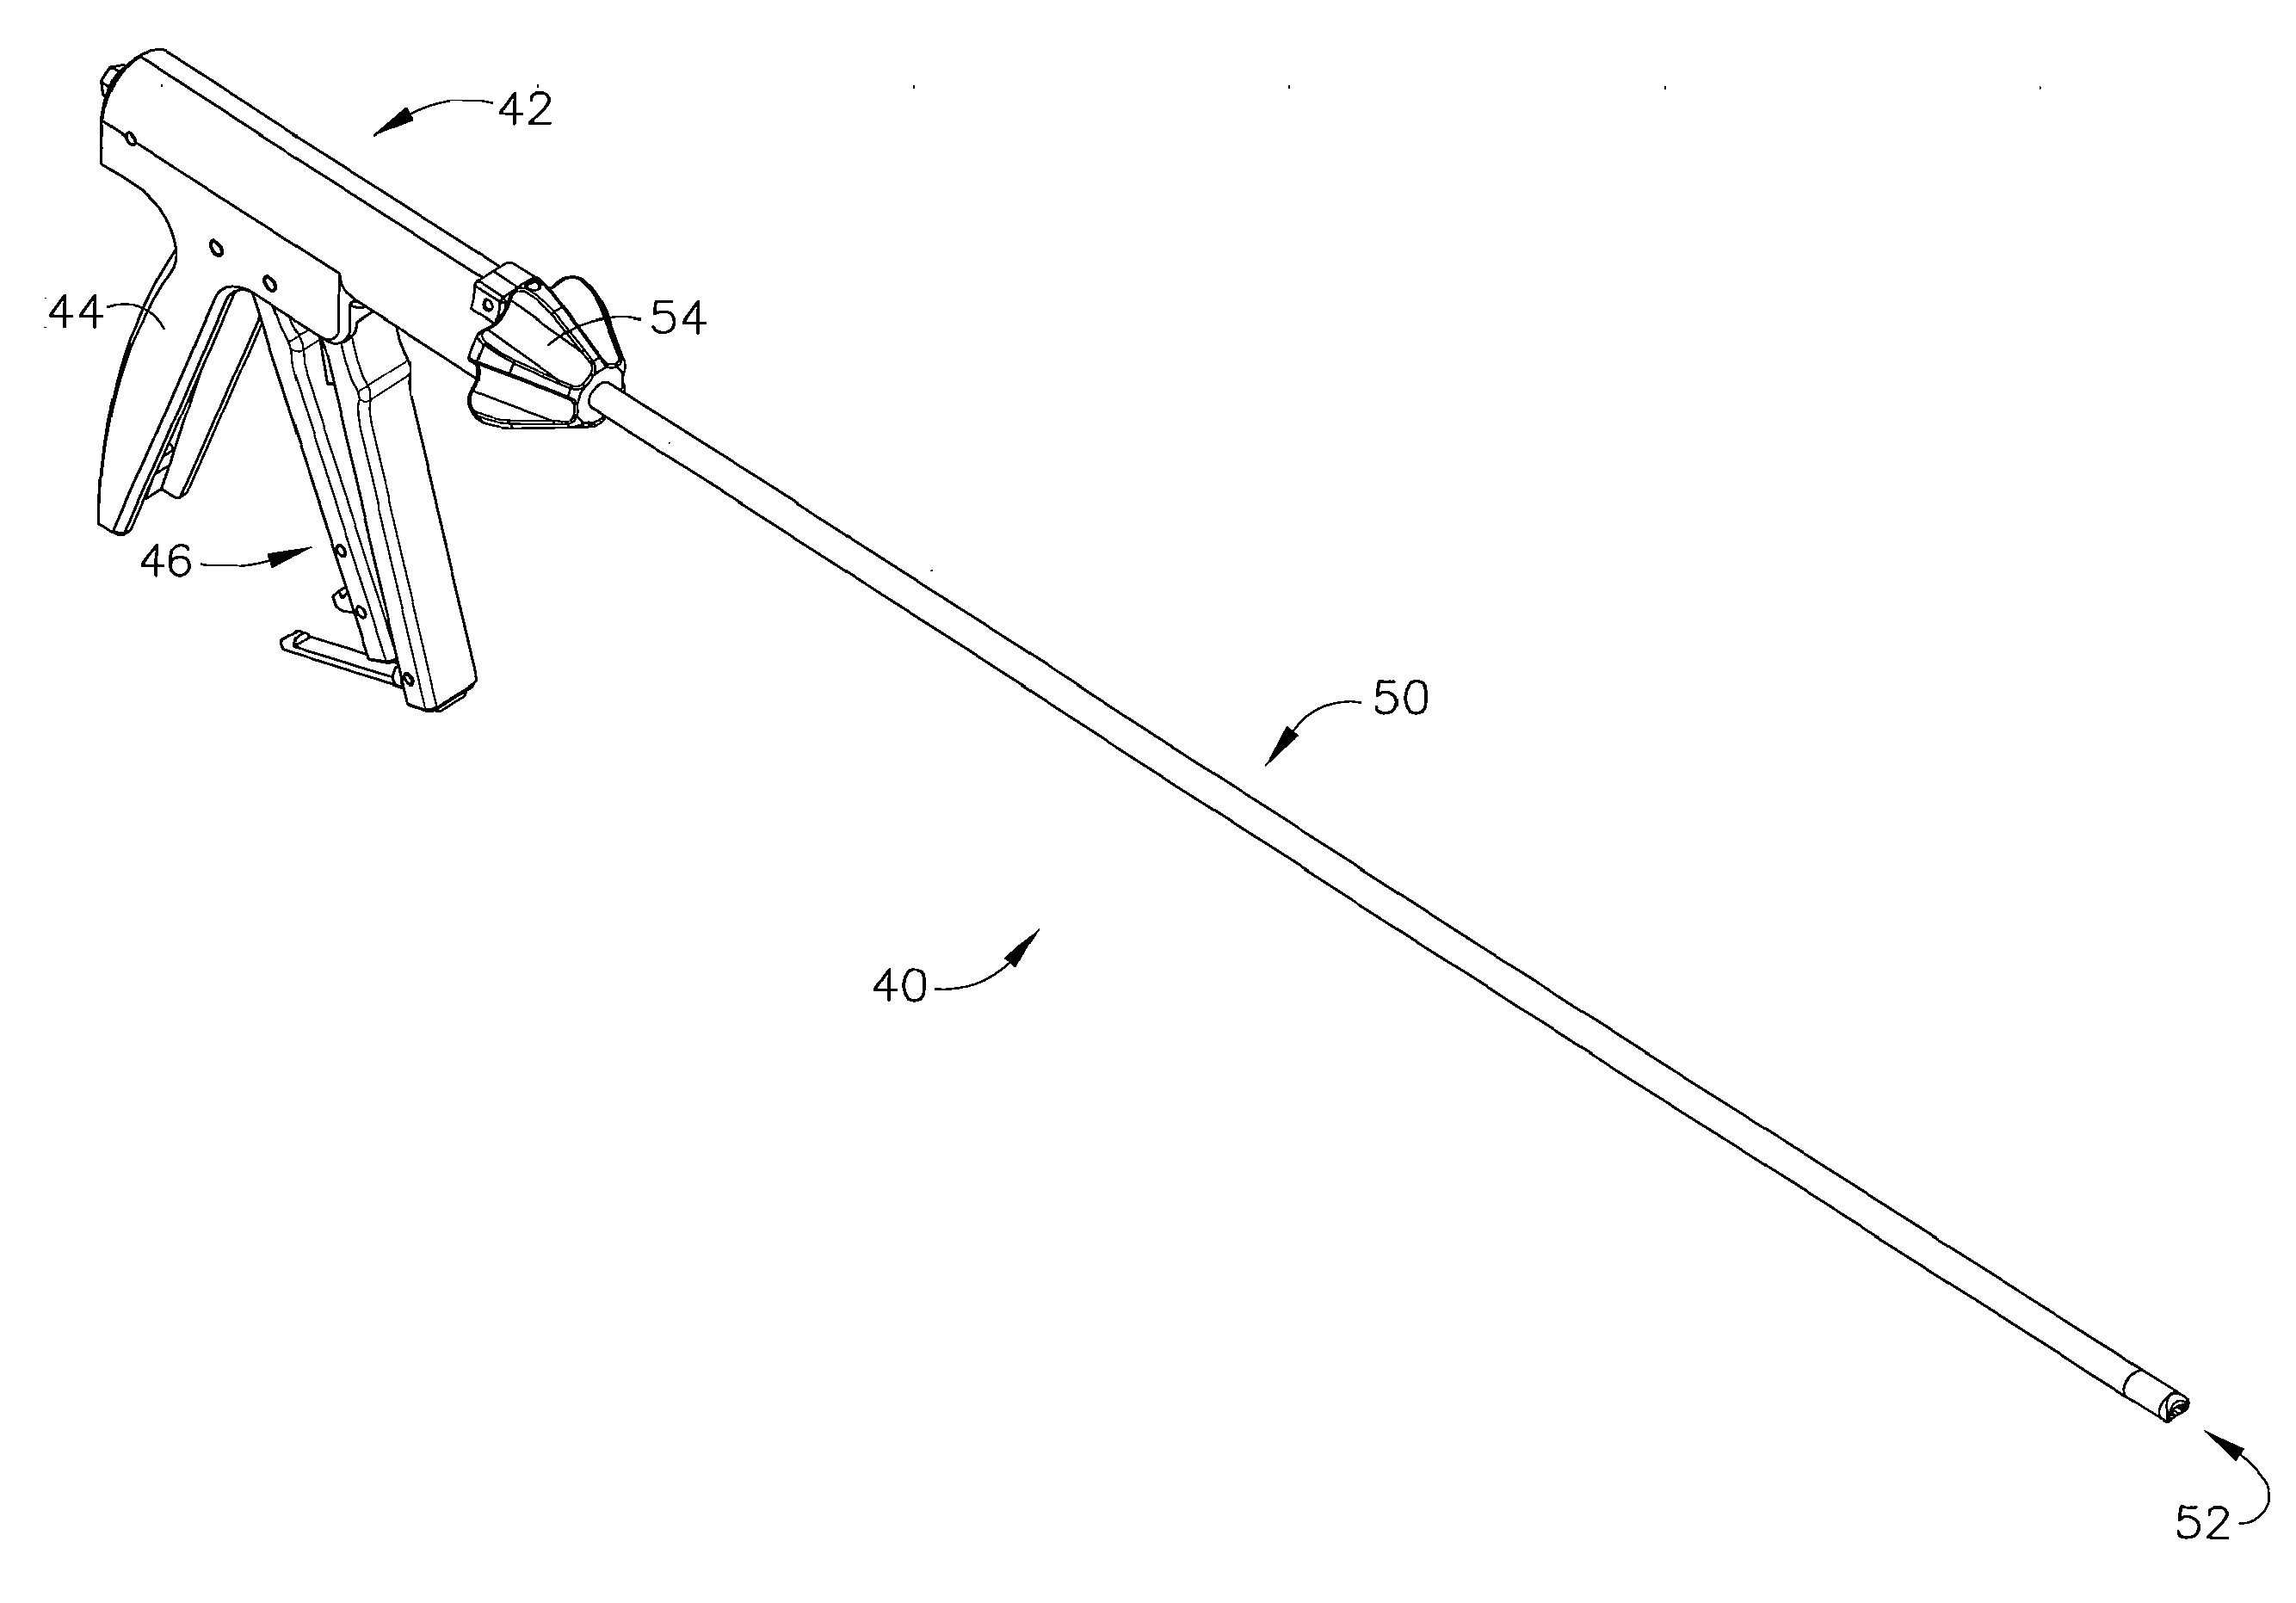 Surgical Stapler For Applying A Large Staple Through A Small Delivery Port And A Method of Using The Stapler To Secure A Tissue Fold